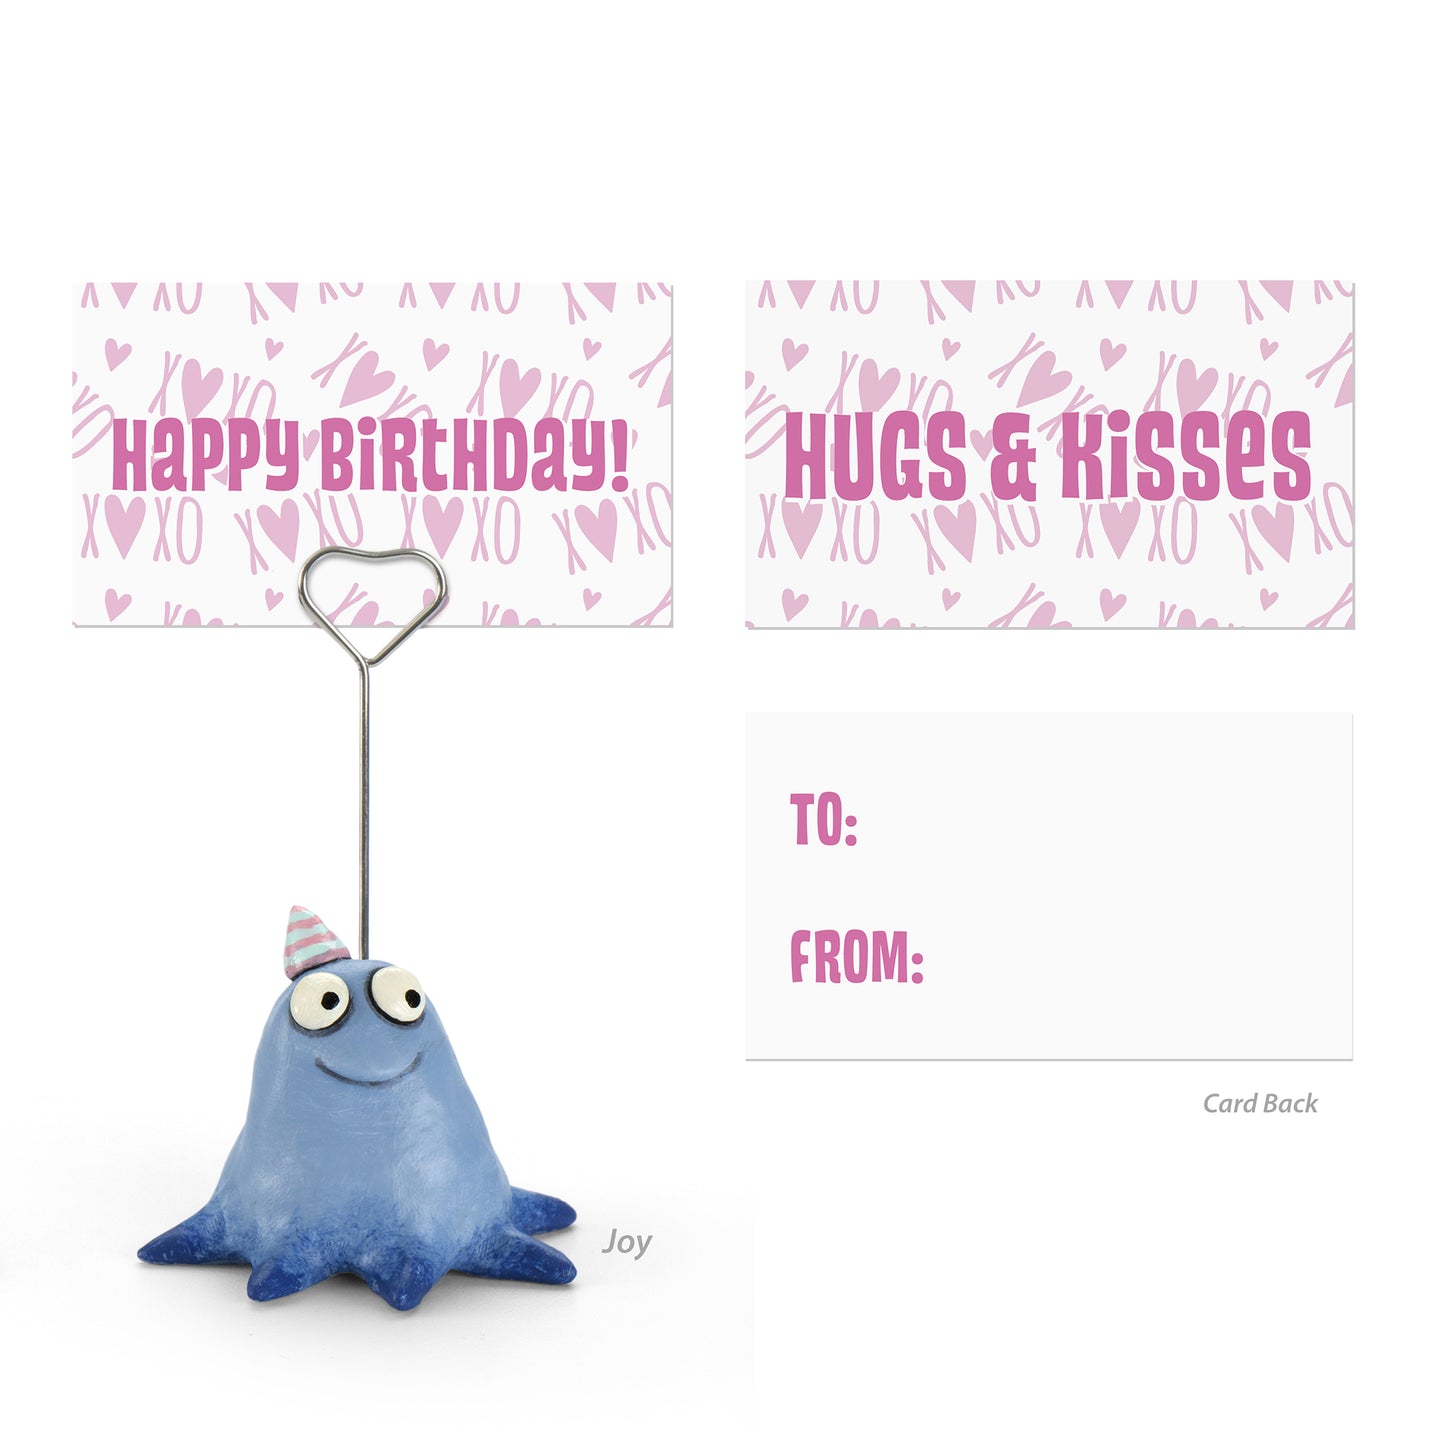 Joy the Party Blob - Comes with 2 greeting cards!